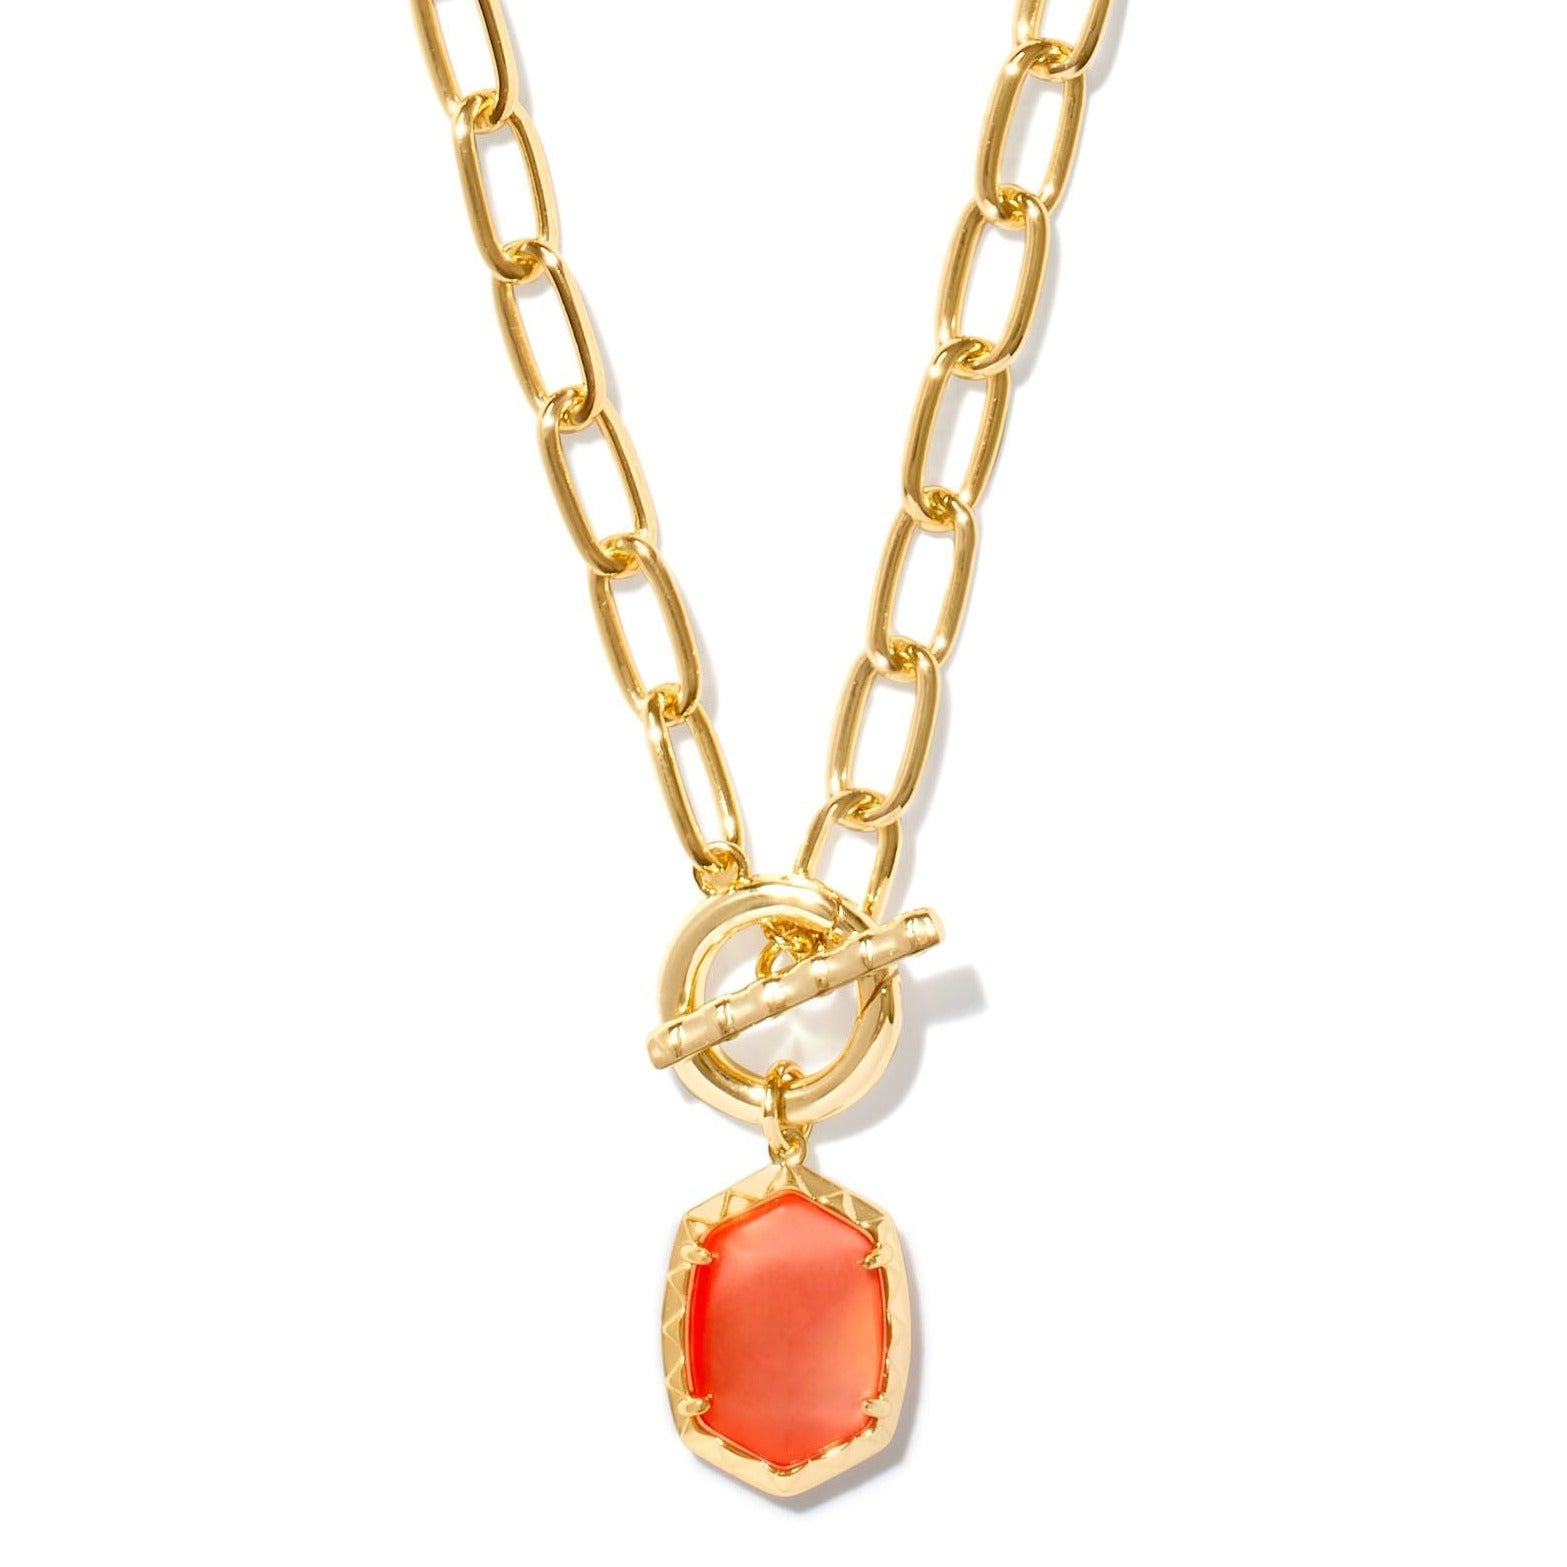 Kendra Scott | Daphne Gold Link and Chain Necklace in Coral Pink Mother of Pearl - Giddy Up Glamour Boutique